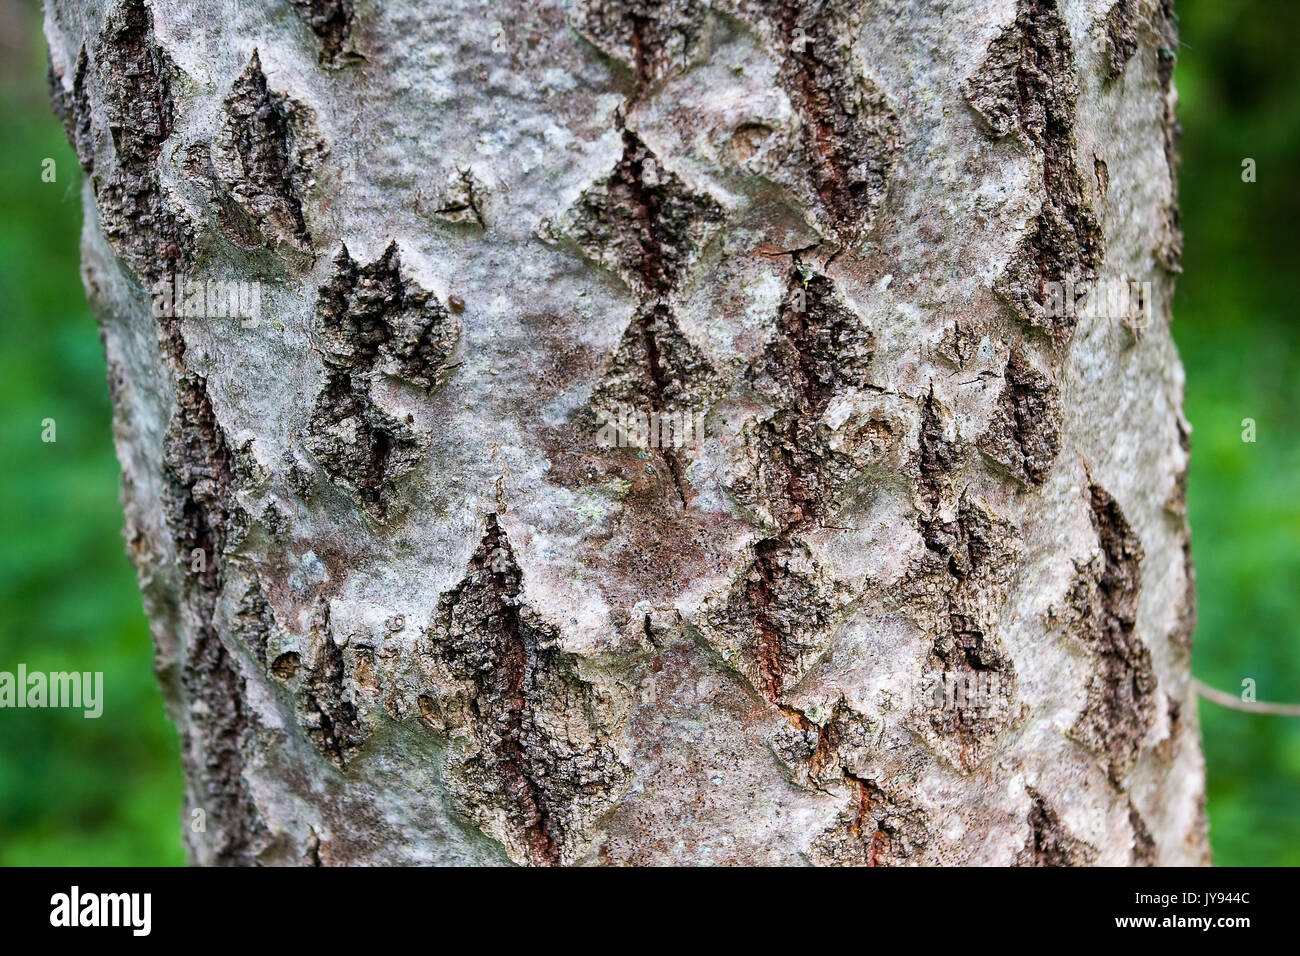 The bark  with the lenticels of the poplar tree Stock Photo